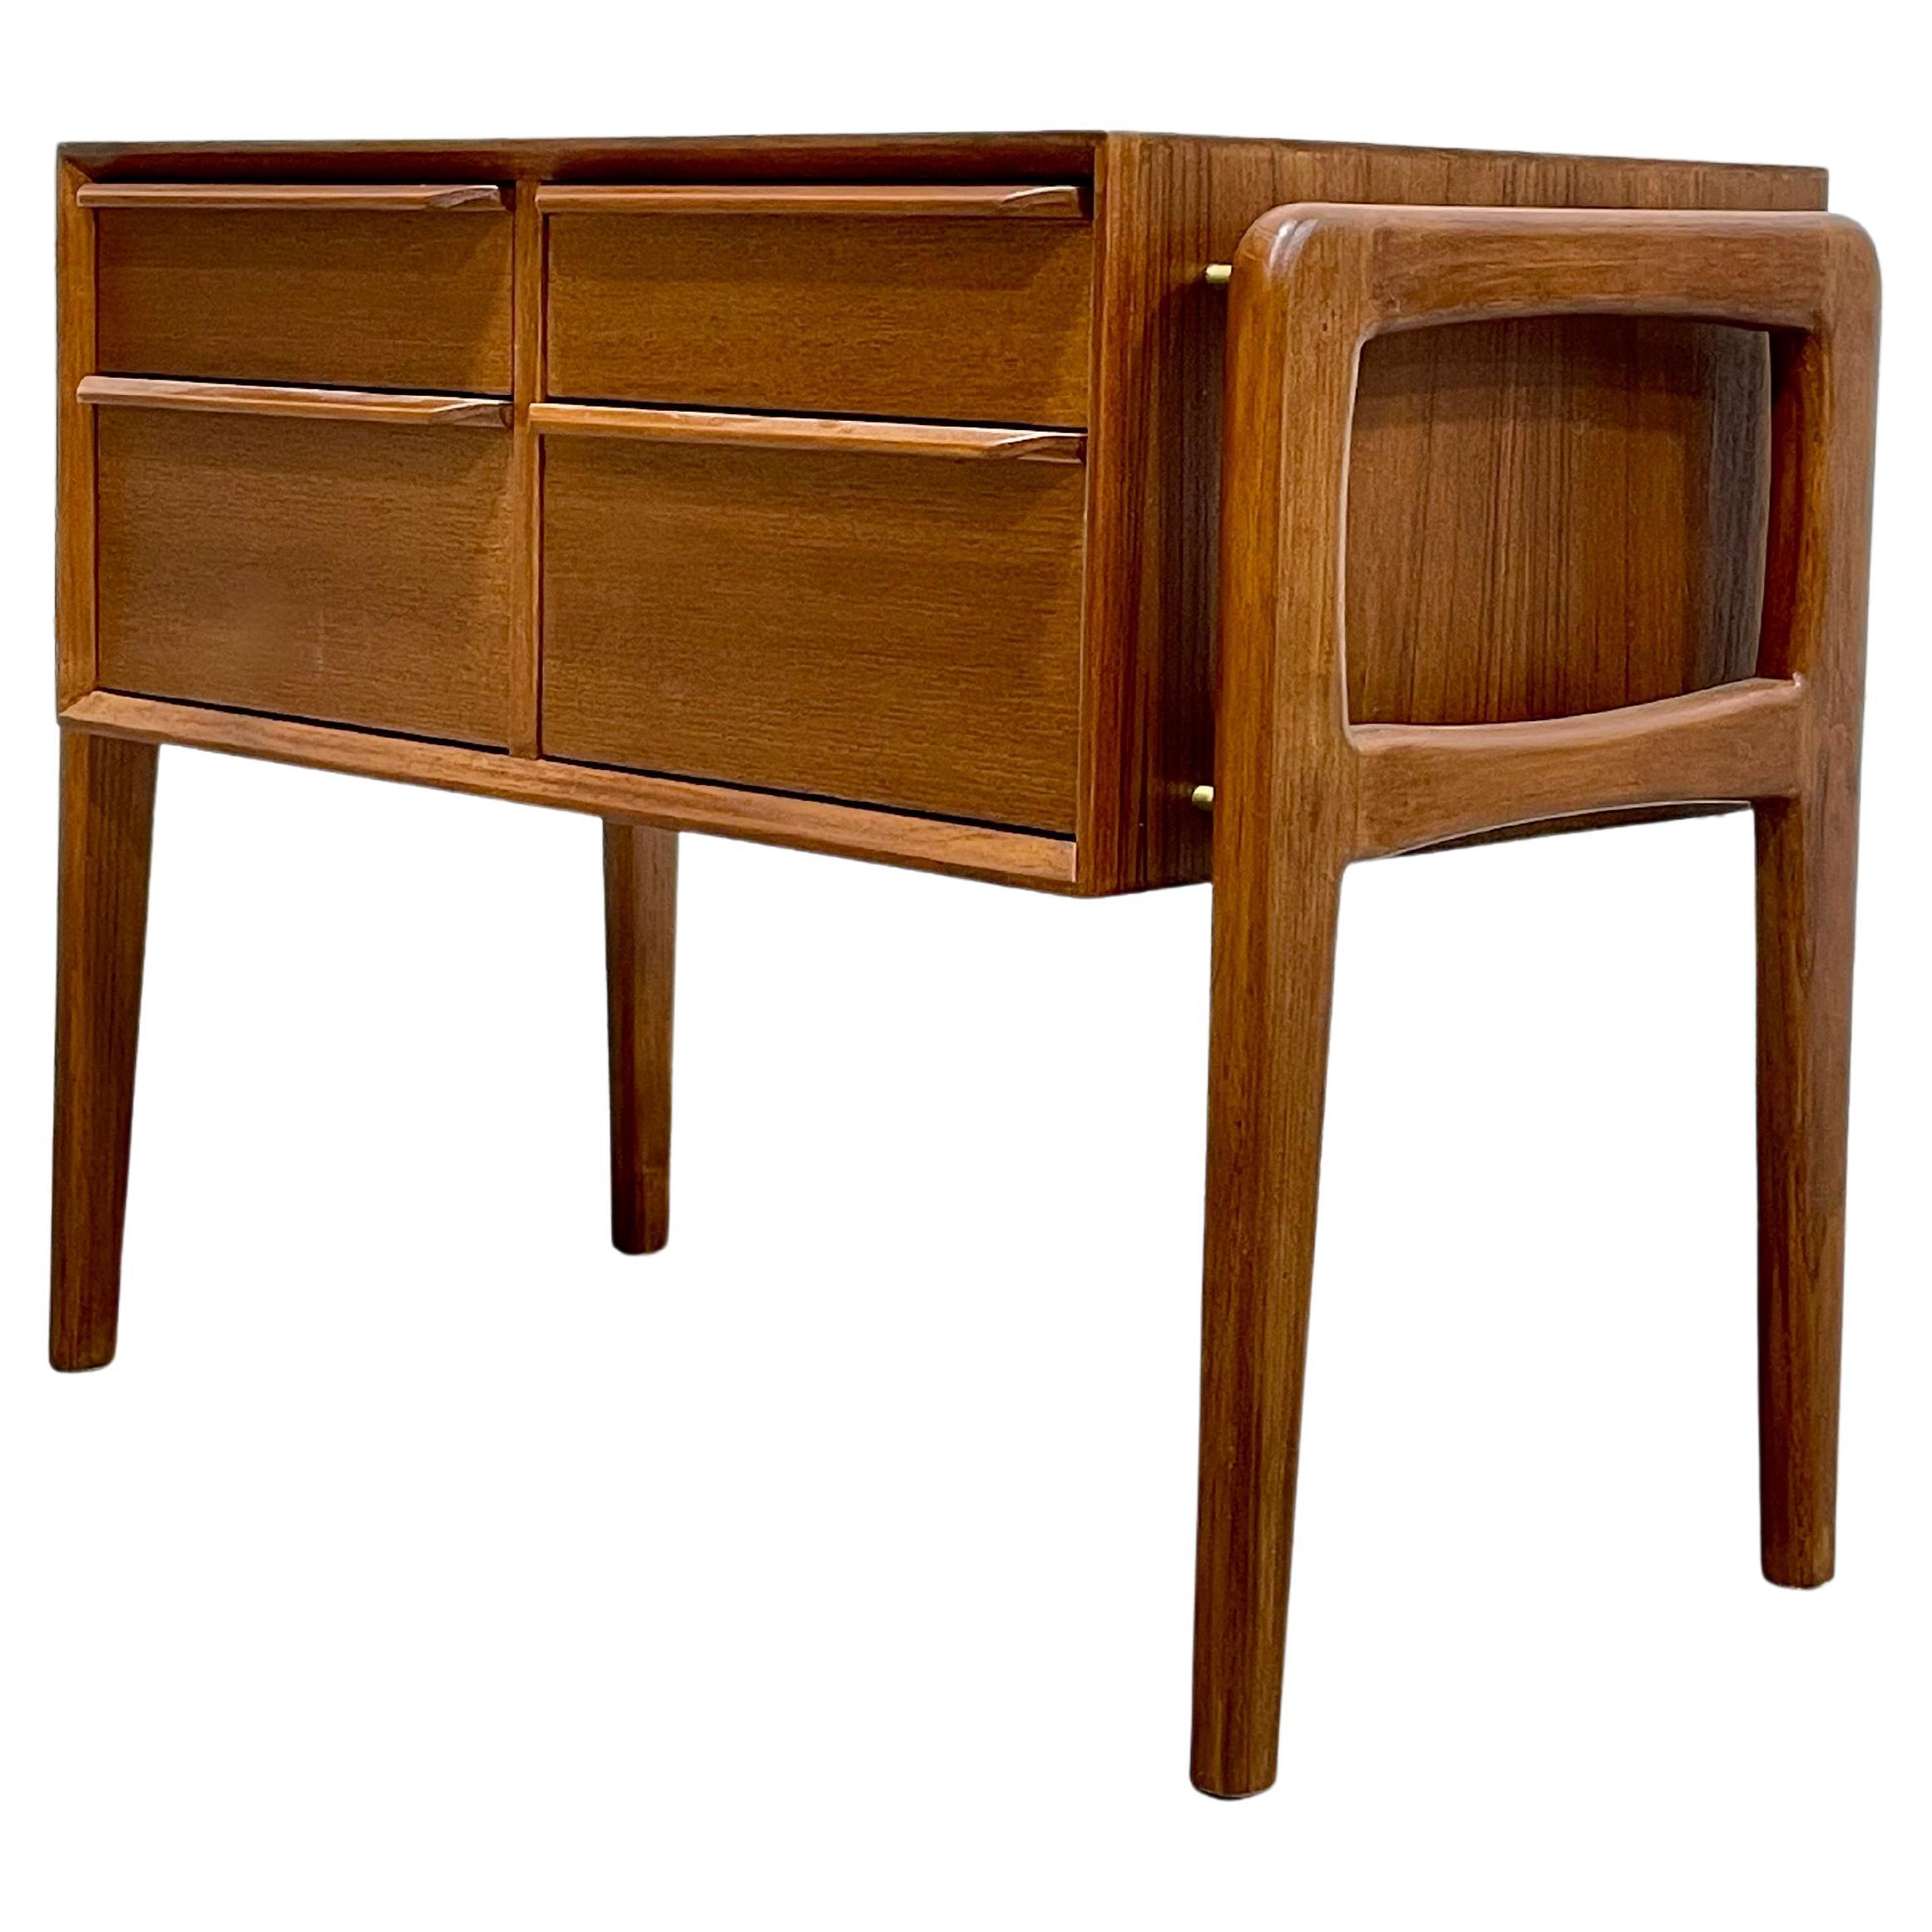 Mid-Century Modern Styled Handmade Teak Cabinet / Entryway Table For Sale